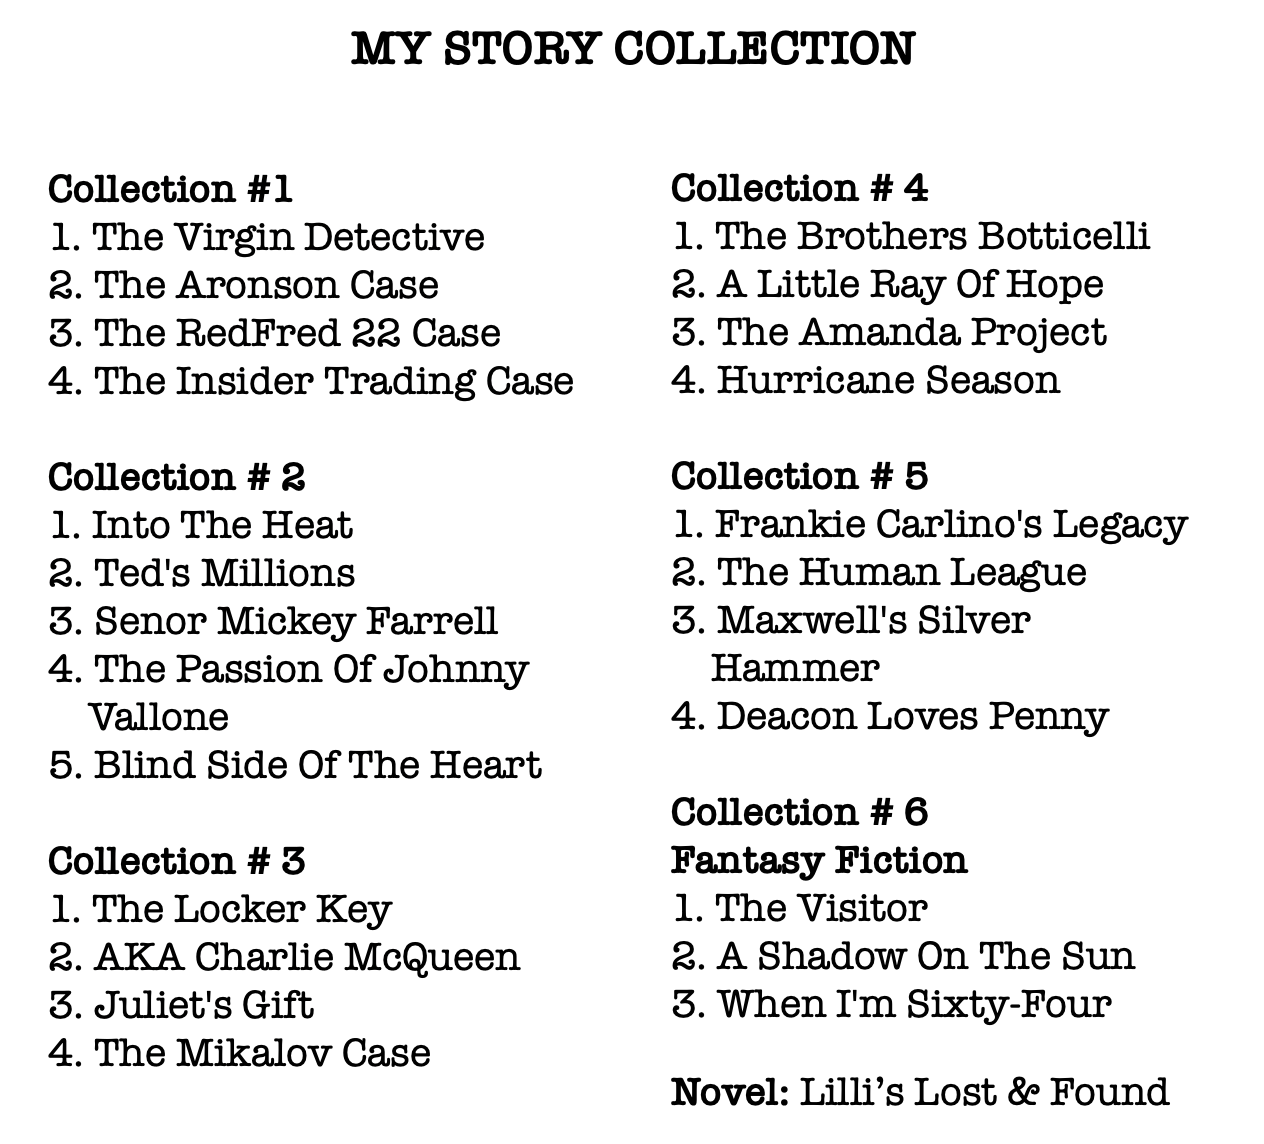 MY STORY COLLECTION

Collection #1

1. The Virgin Detective

2. The Aronson Case

3. The RedFred QR Case

4. The Insider Trading Case

Collection # 2

1. Into The Heat

2. Ted's Millions

3. Senor Mickey Farrell

4. The Passion Of Johnny
Vallone

5. Blind Side Of The Heart

Collection # 3

1. The Locker Key

2. AKA Charlie McQueen
3. Juliet's Gift

4. The Mikalov Case

Collection # 4

1. The Brothers Botticelli
2. A Little Ray Of Hope

3. The Amanda Project
4. Hurricane Season

Collection # 85

1. Frankie Carlino's Legacy

2. The Human League

3. Maxwell's Silver
Hammer

4. Deacon Loves Penny

Collection # 6

Fantasy Fiction

1. The Visitor

2. A Shadow On The Sun
3. When I'm Sixty-Four

Novel: Lilli’s Lost & Found